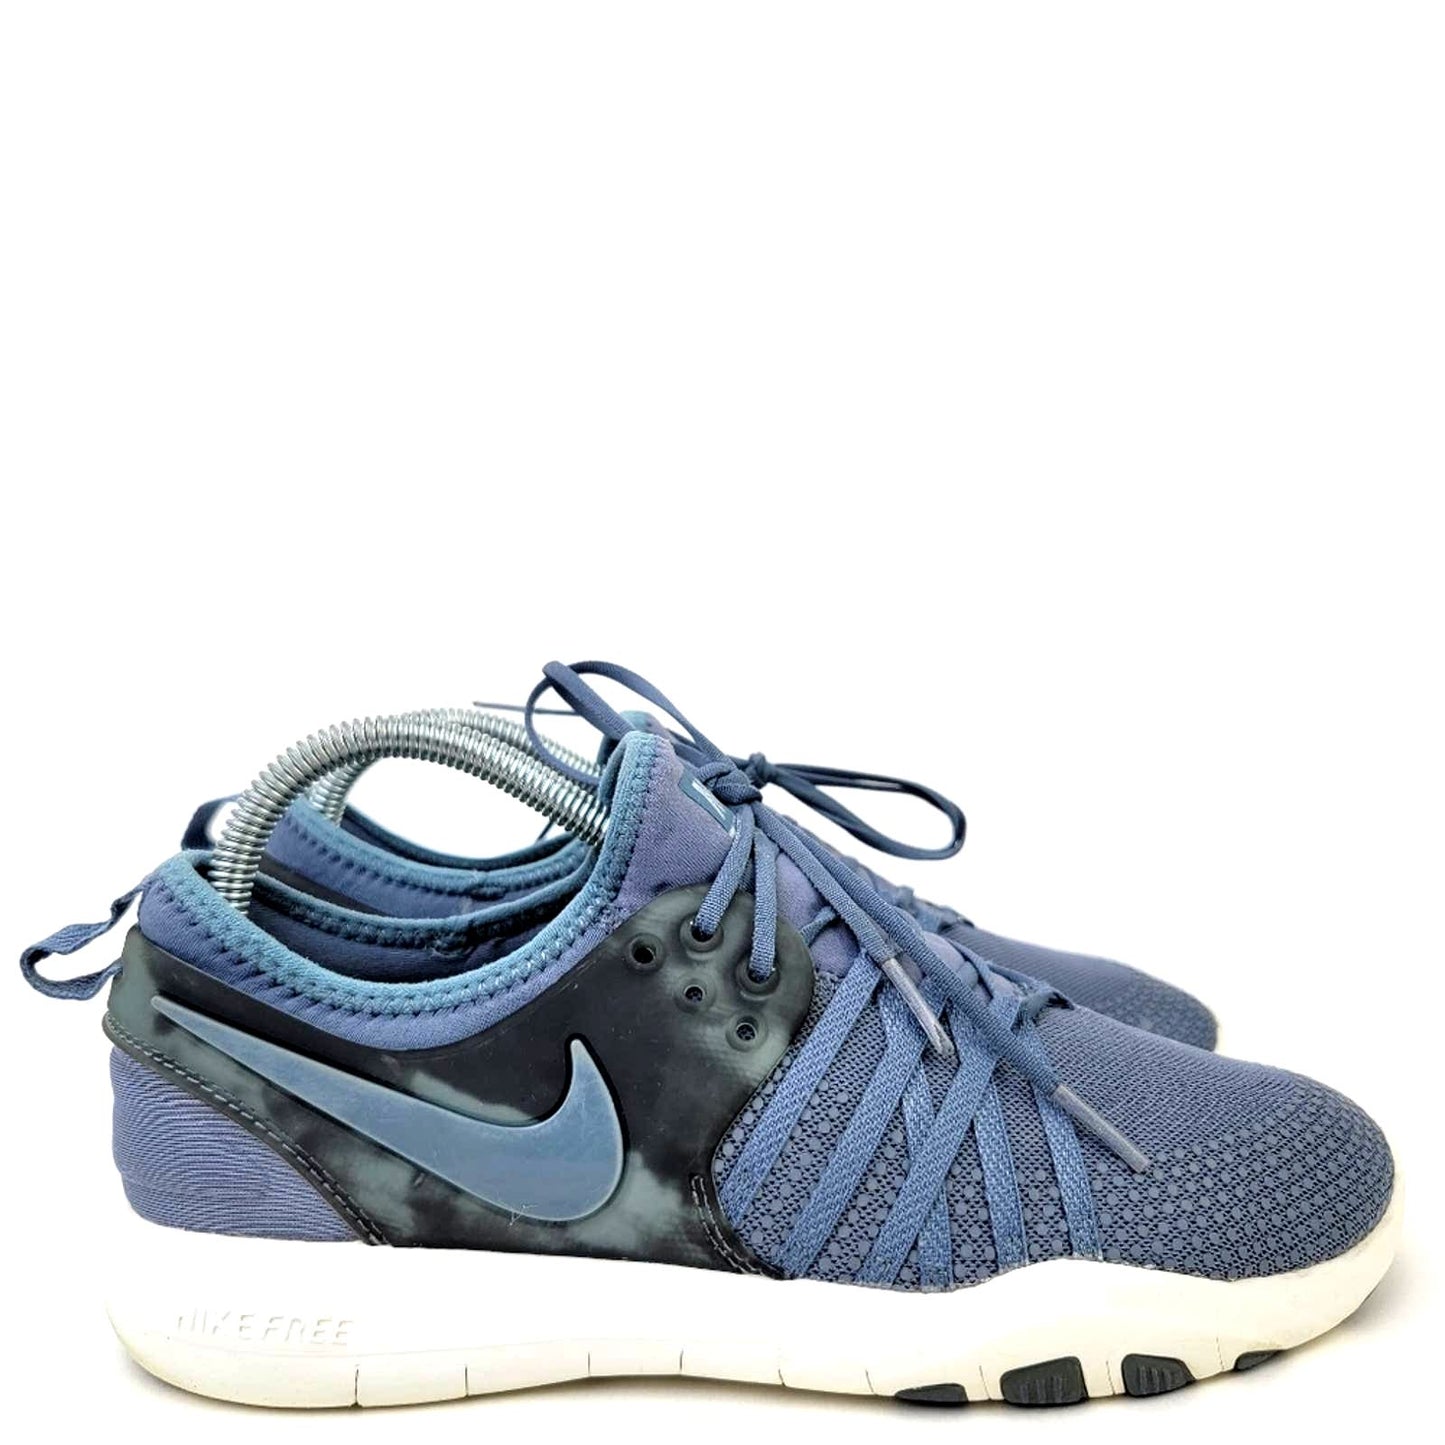 Nike Free TR 7 Armory Blue AMP Running Shoes - 8